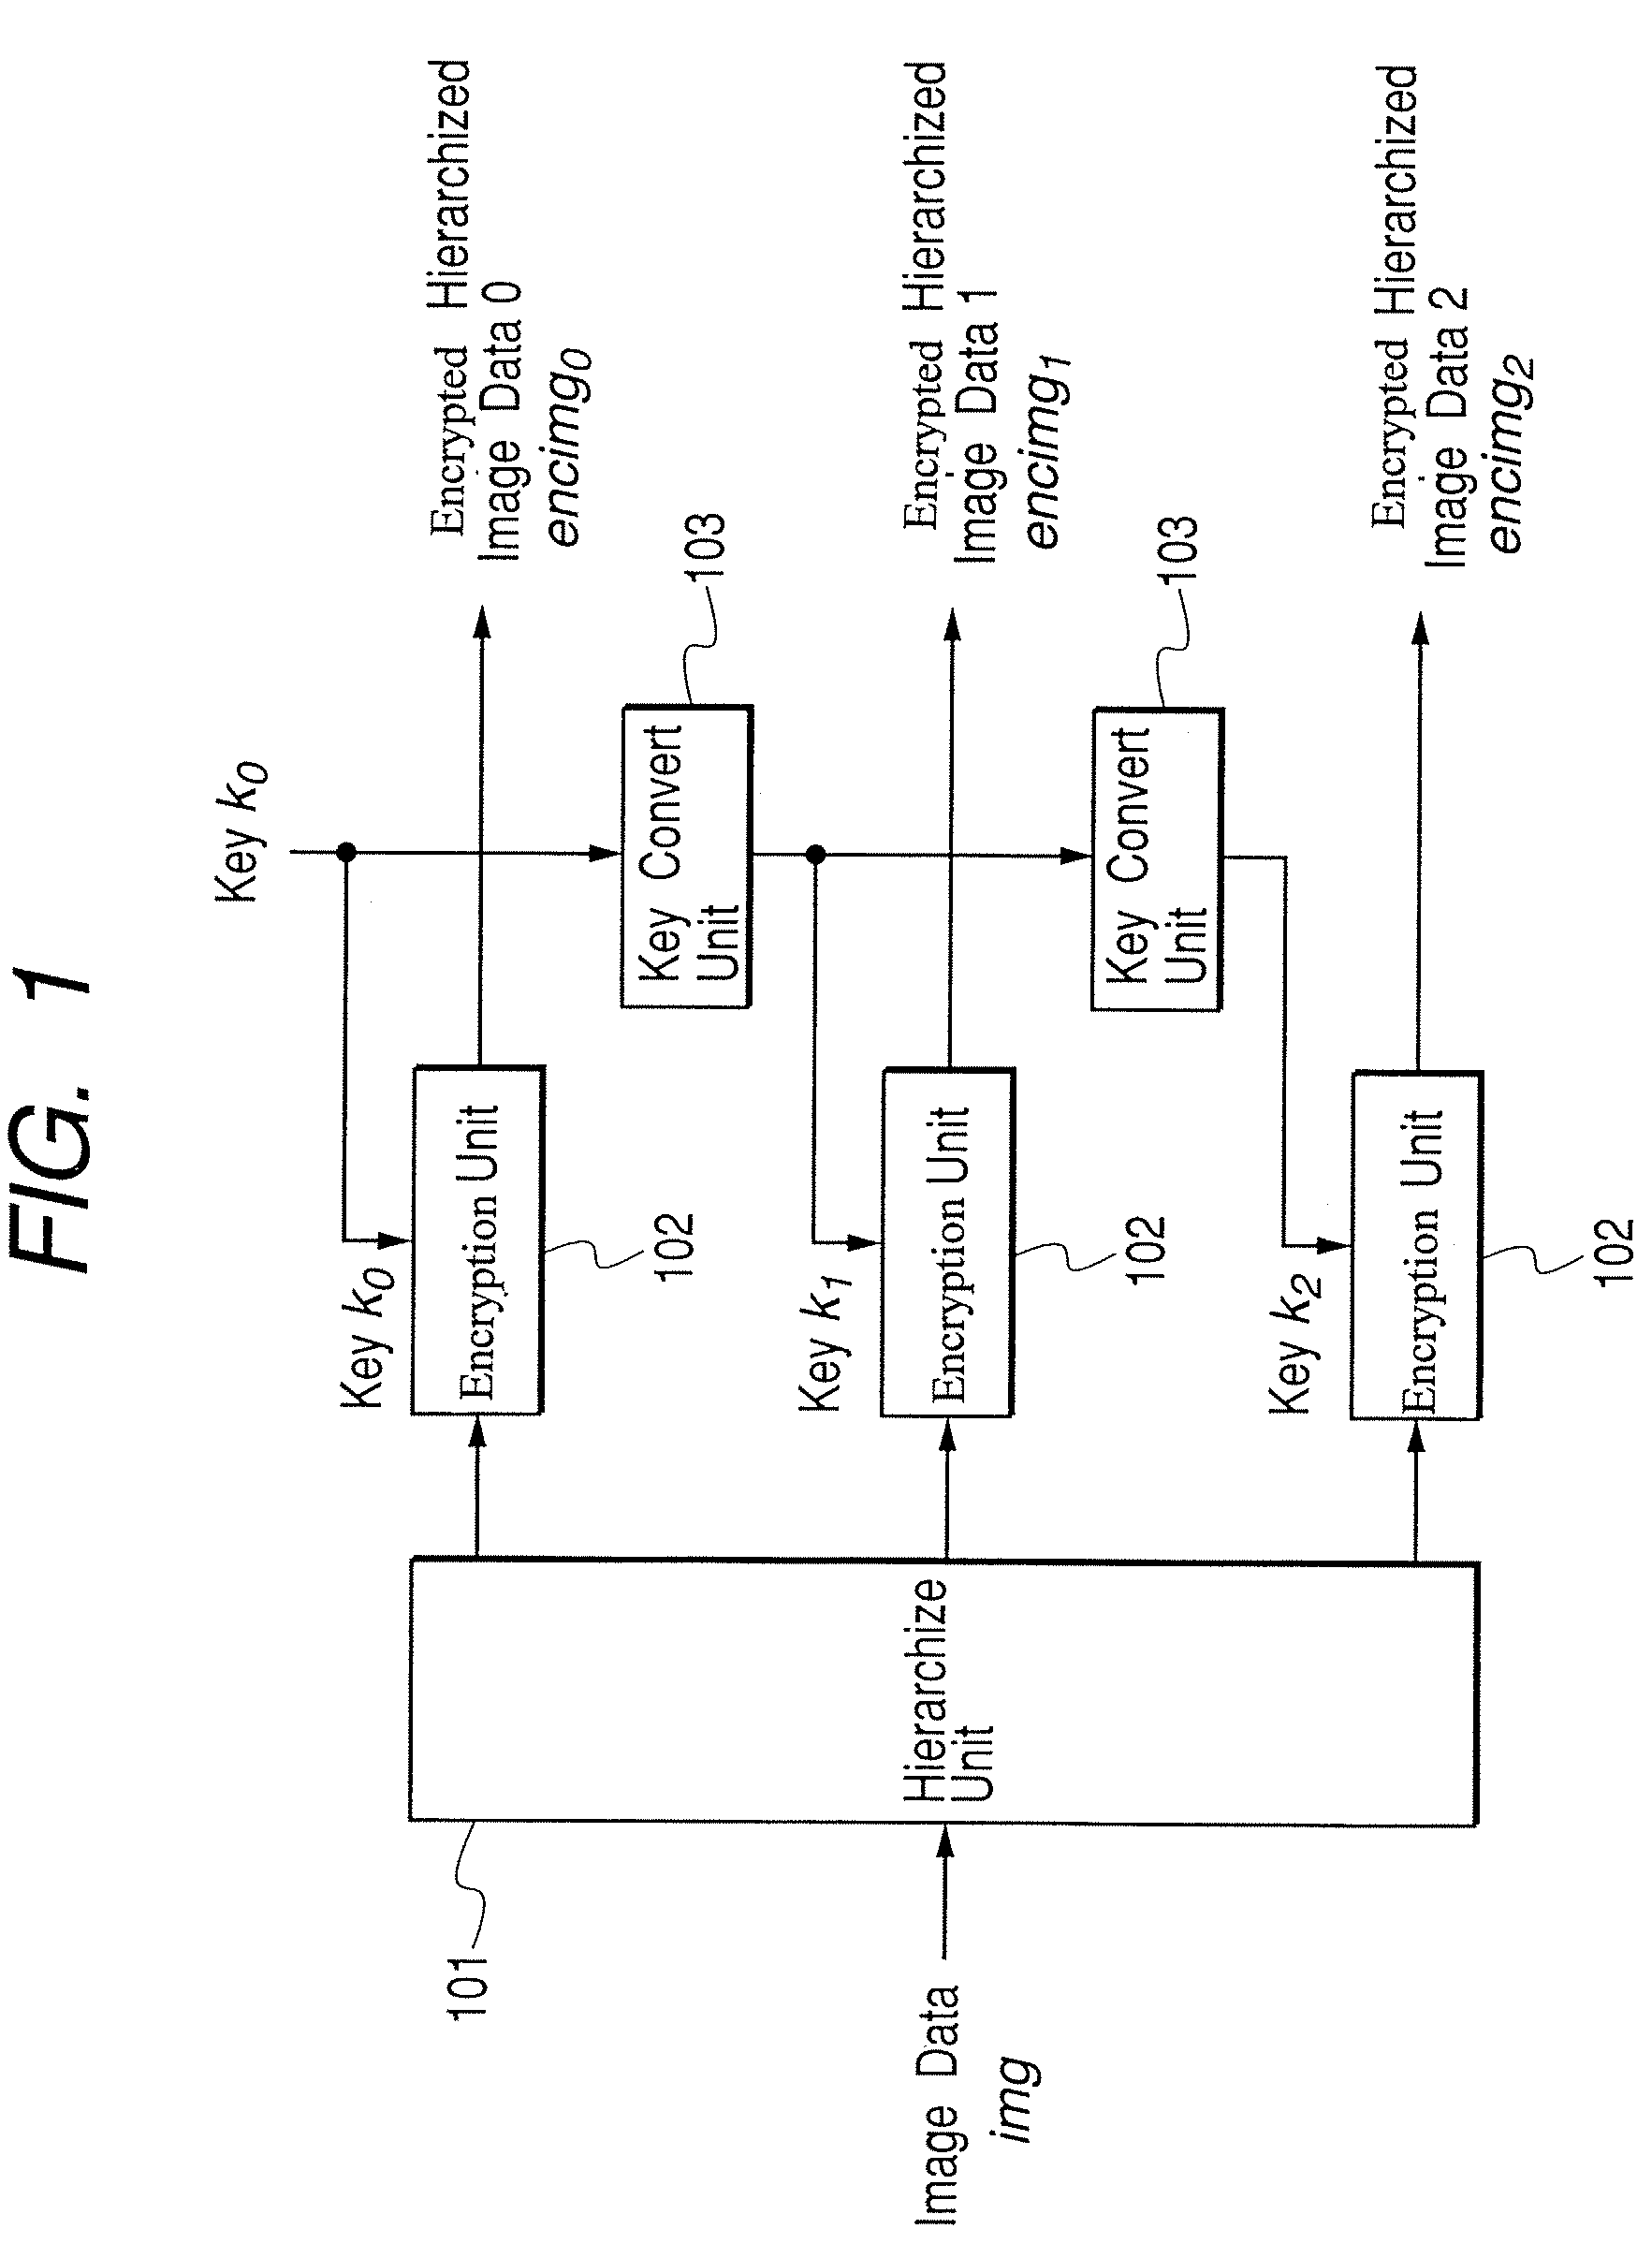 Data process apparatus and method therefor